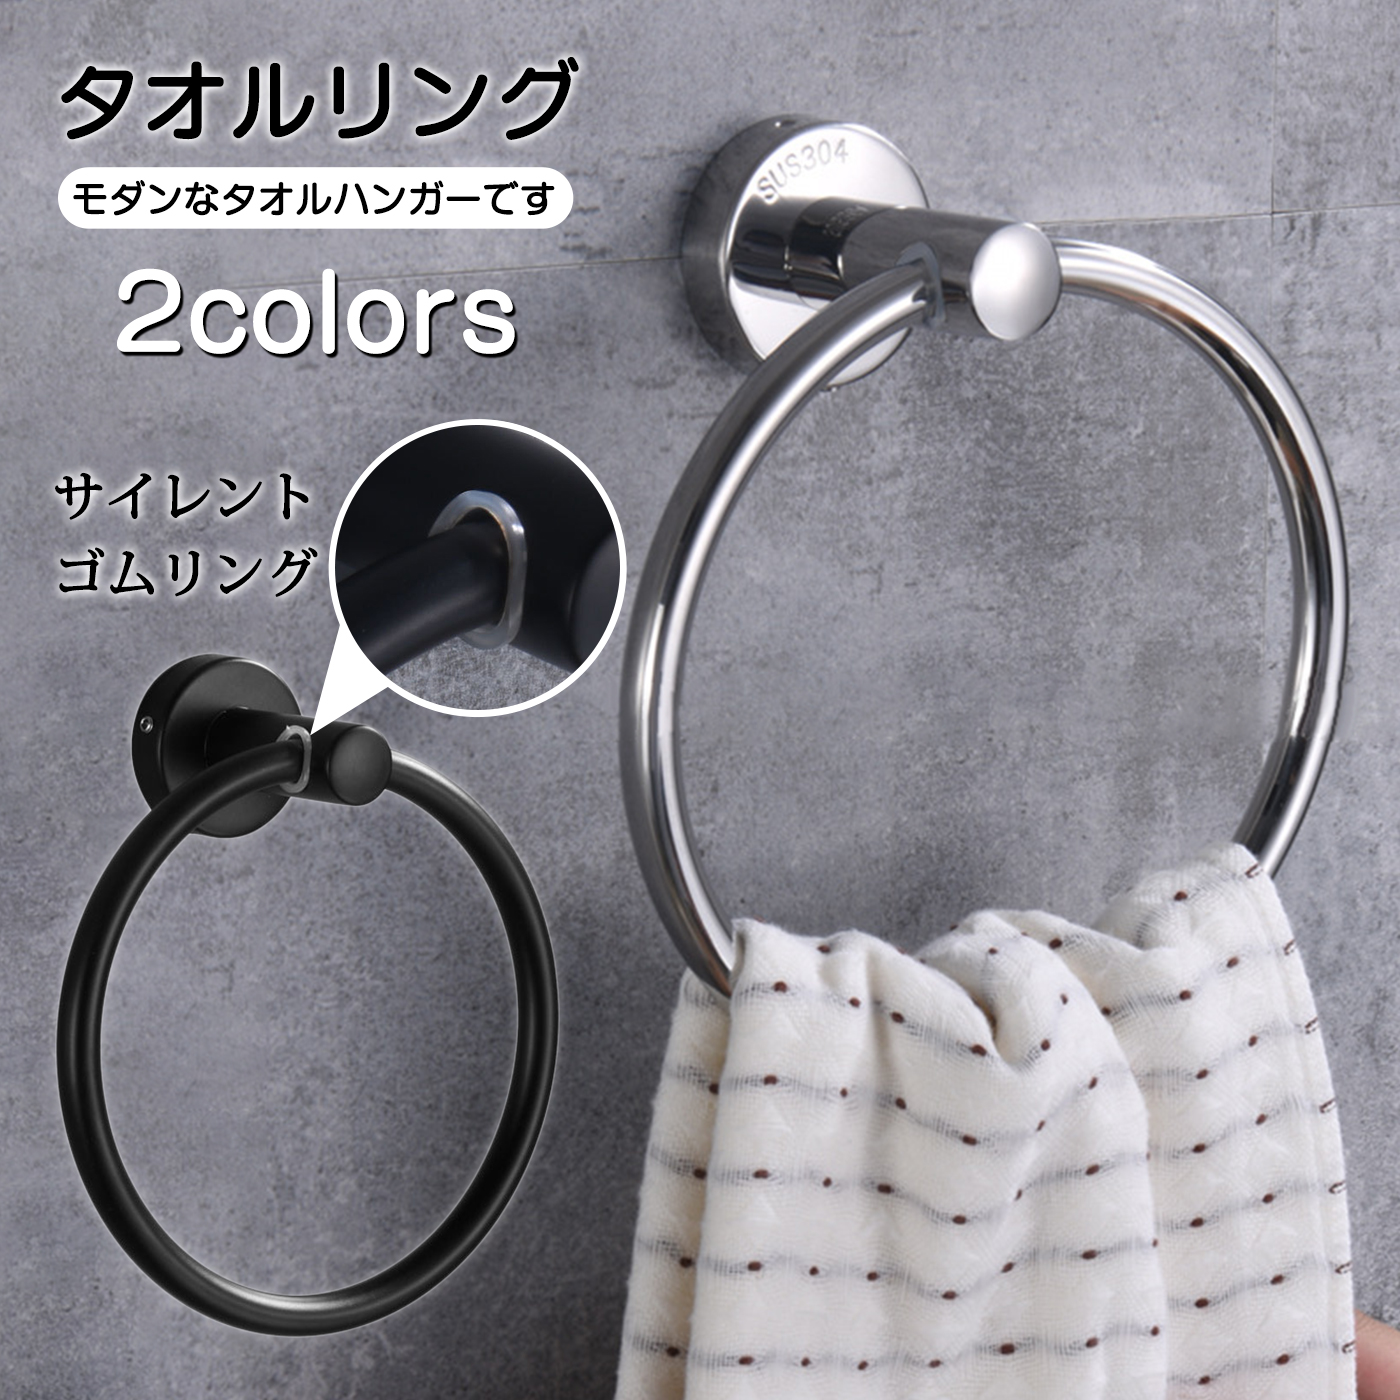  hand towel holder towel .. ring stainless steel 304 towel for ring wall attaching bathroom towel holder round type towel hanger 